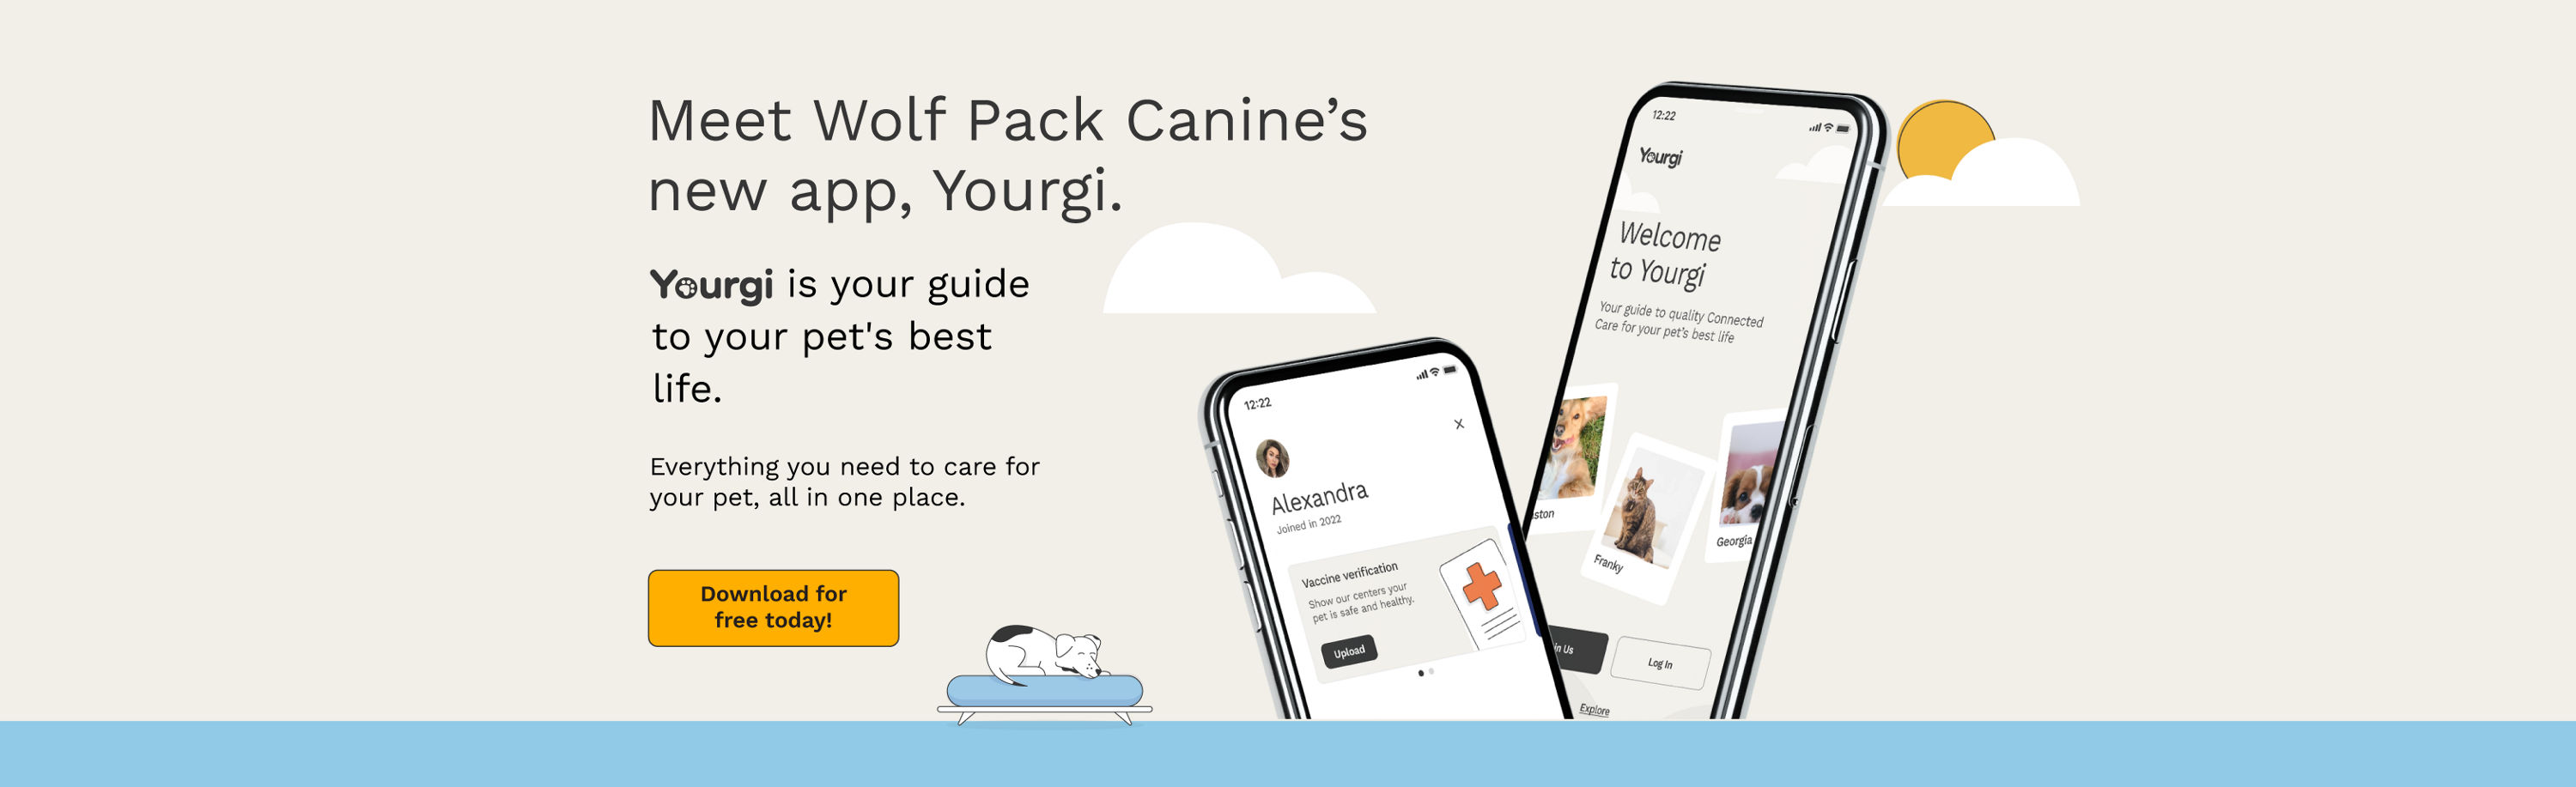 Meet Wolf Pack Canine's new app, Yourgi.